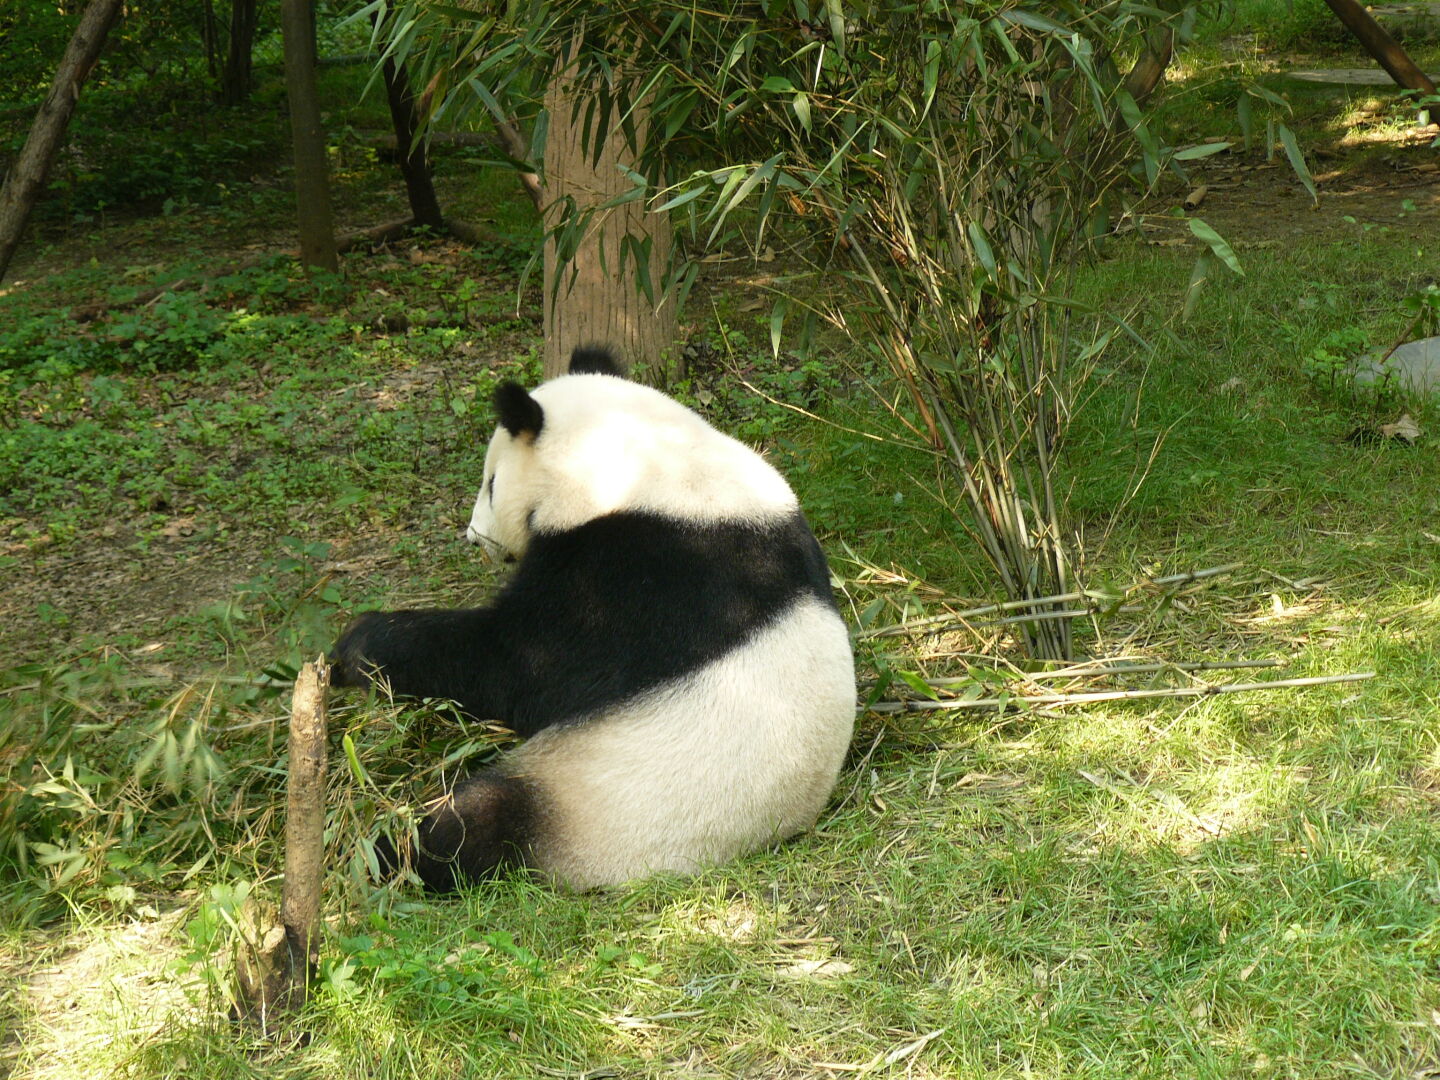 Pandas prefer eating with their backs to the spectators.